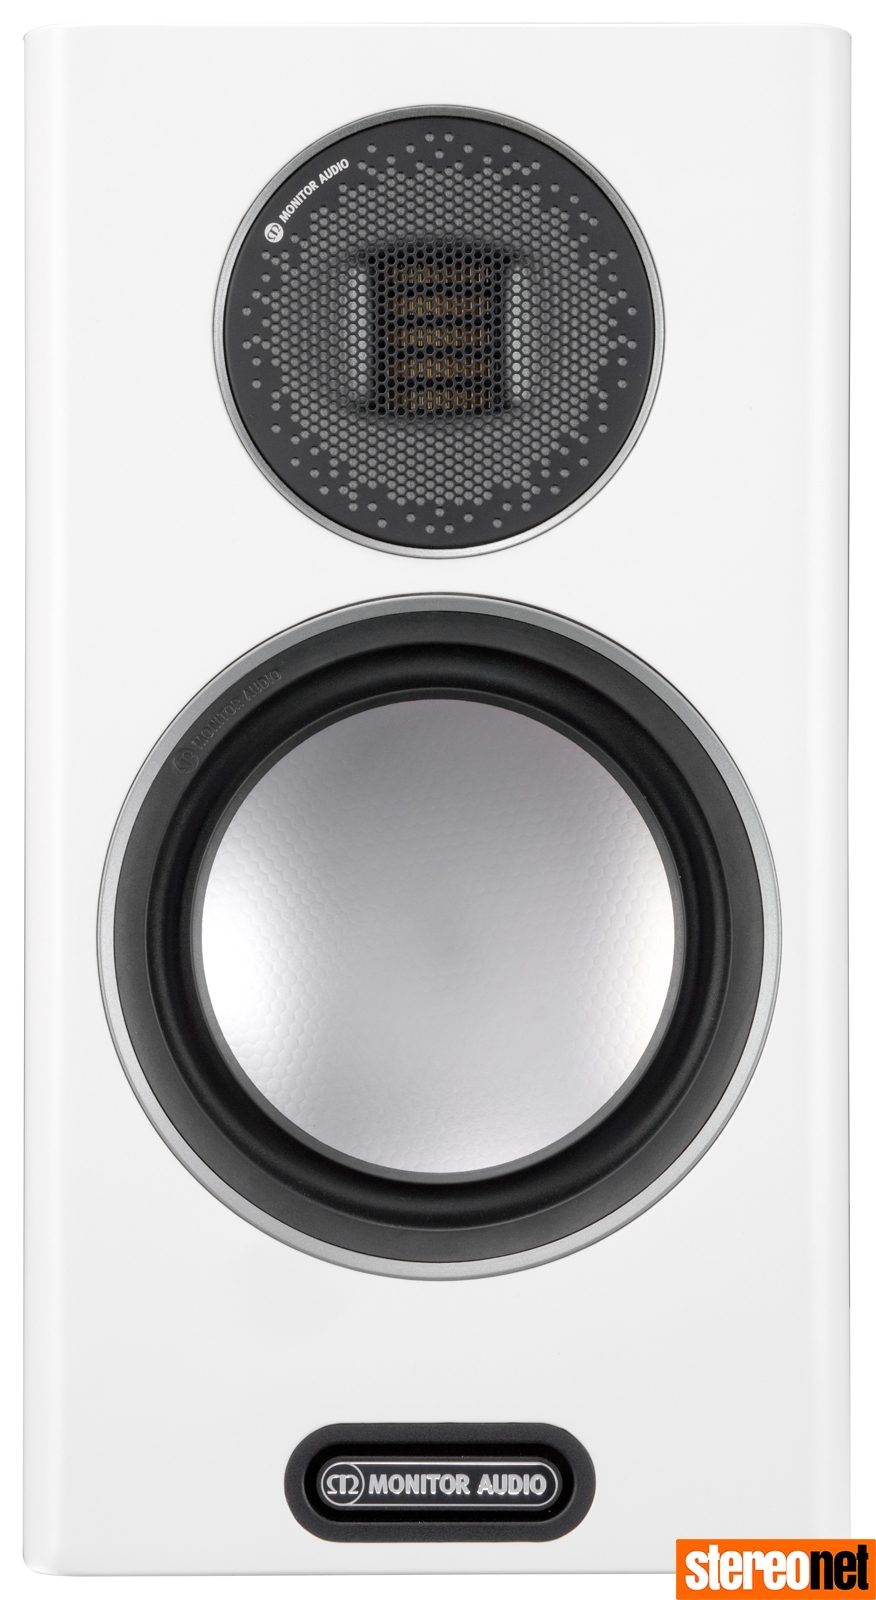 Monitor Audio Gold 100 Speaker Review